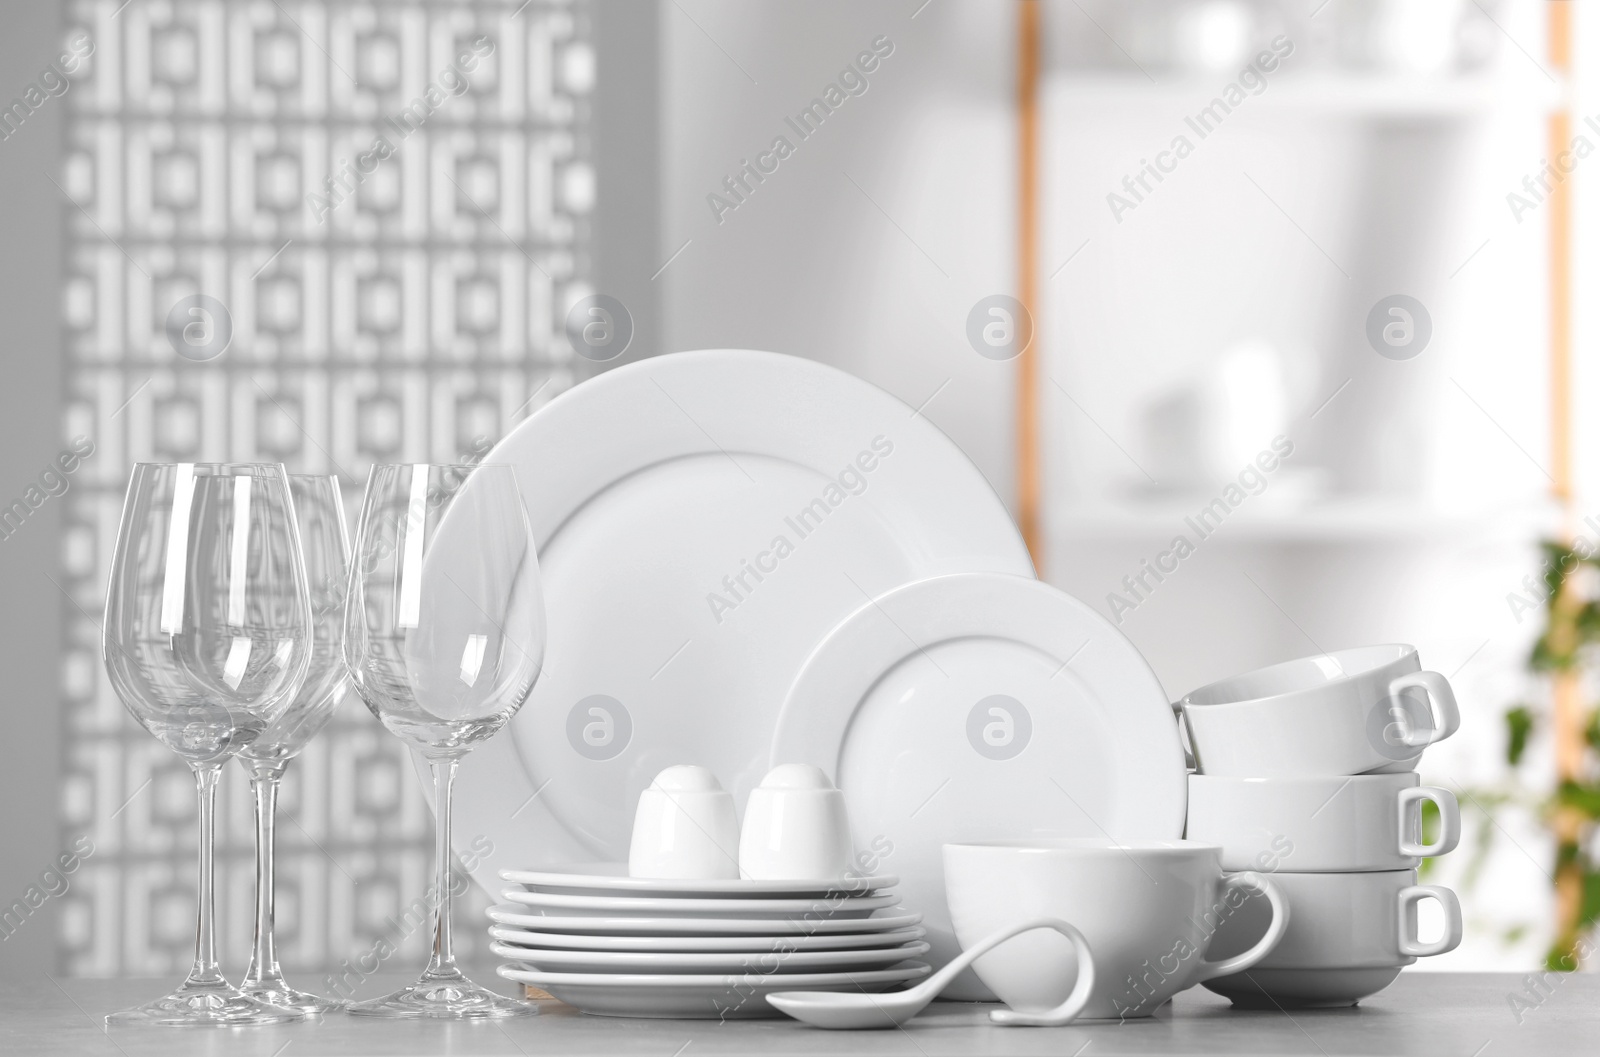 Photo of Set of clean dishware and glasses on light table